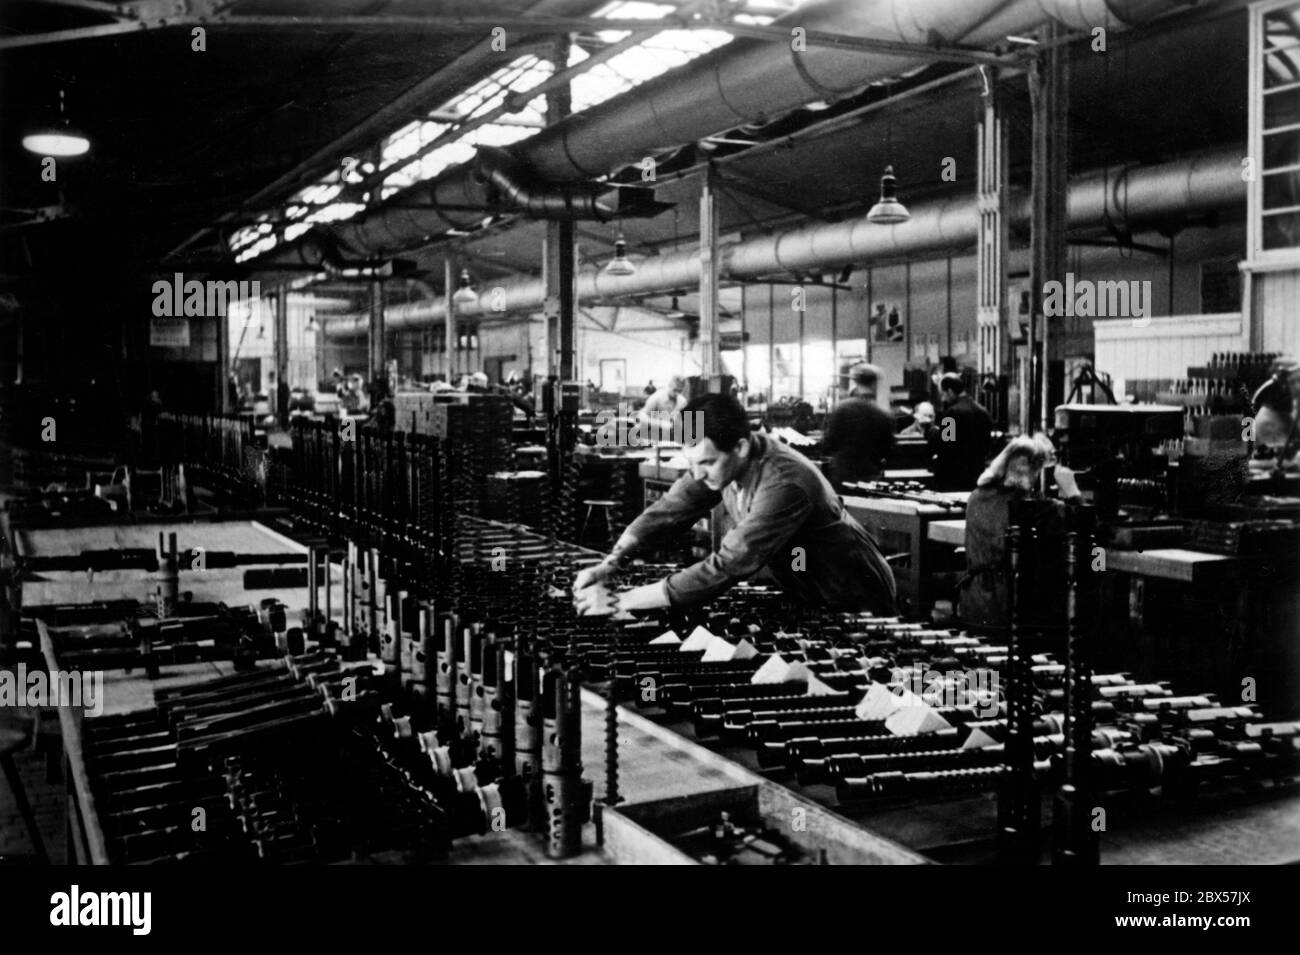 Components for the MG34 are manufactured in a factory building. In the picture, a worker is attaching a control card to finished and inspected parts. Stock Photo